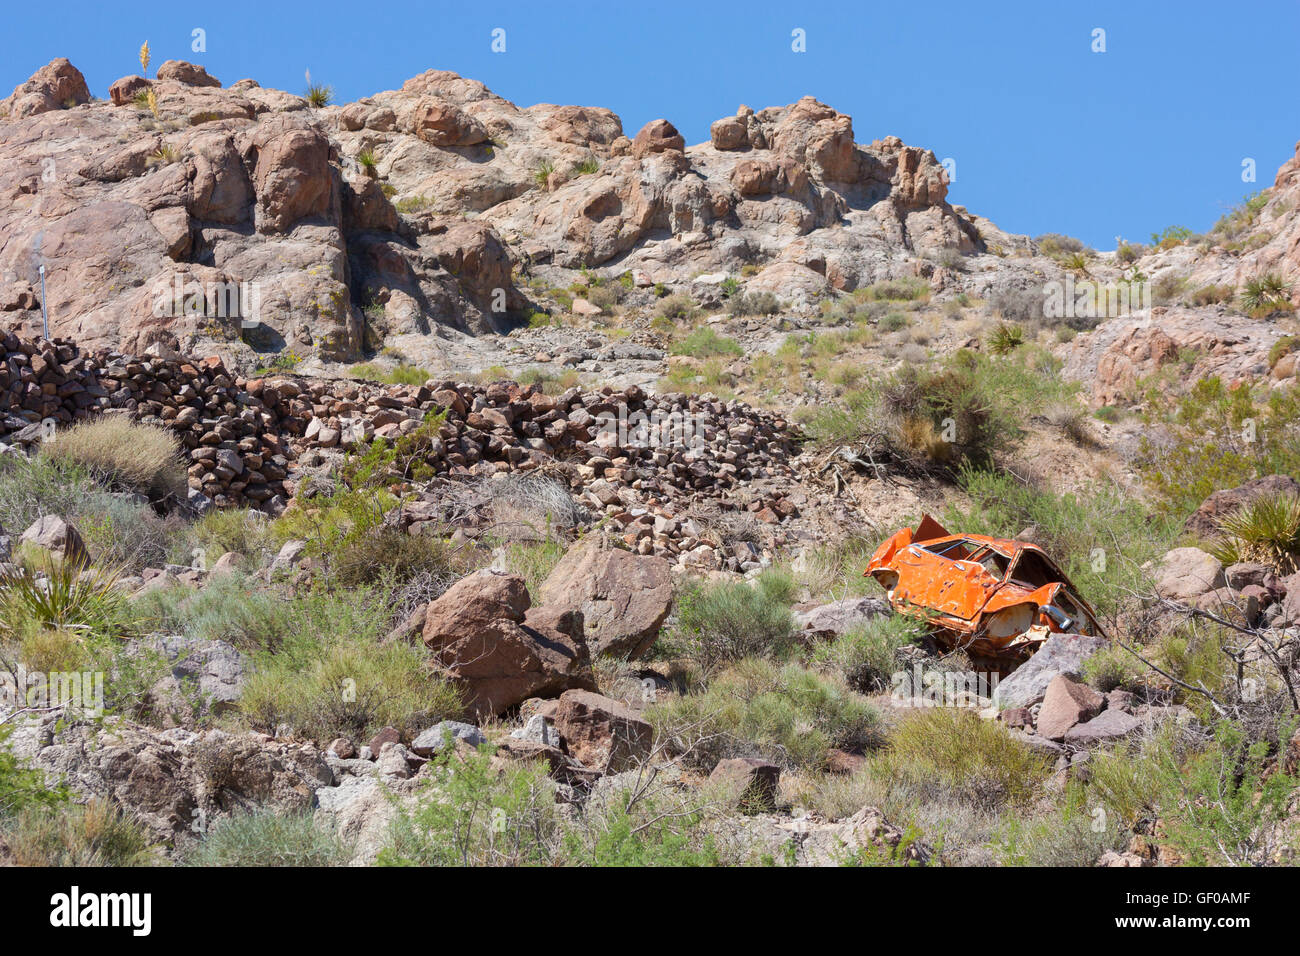 A wrecked car on a mountainside in Arizona Stock Photo